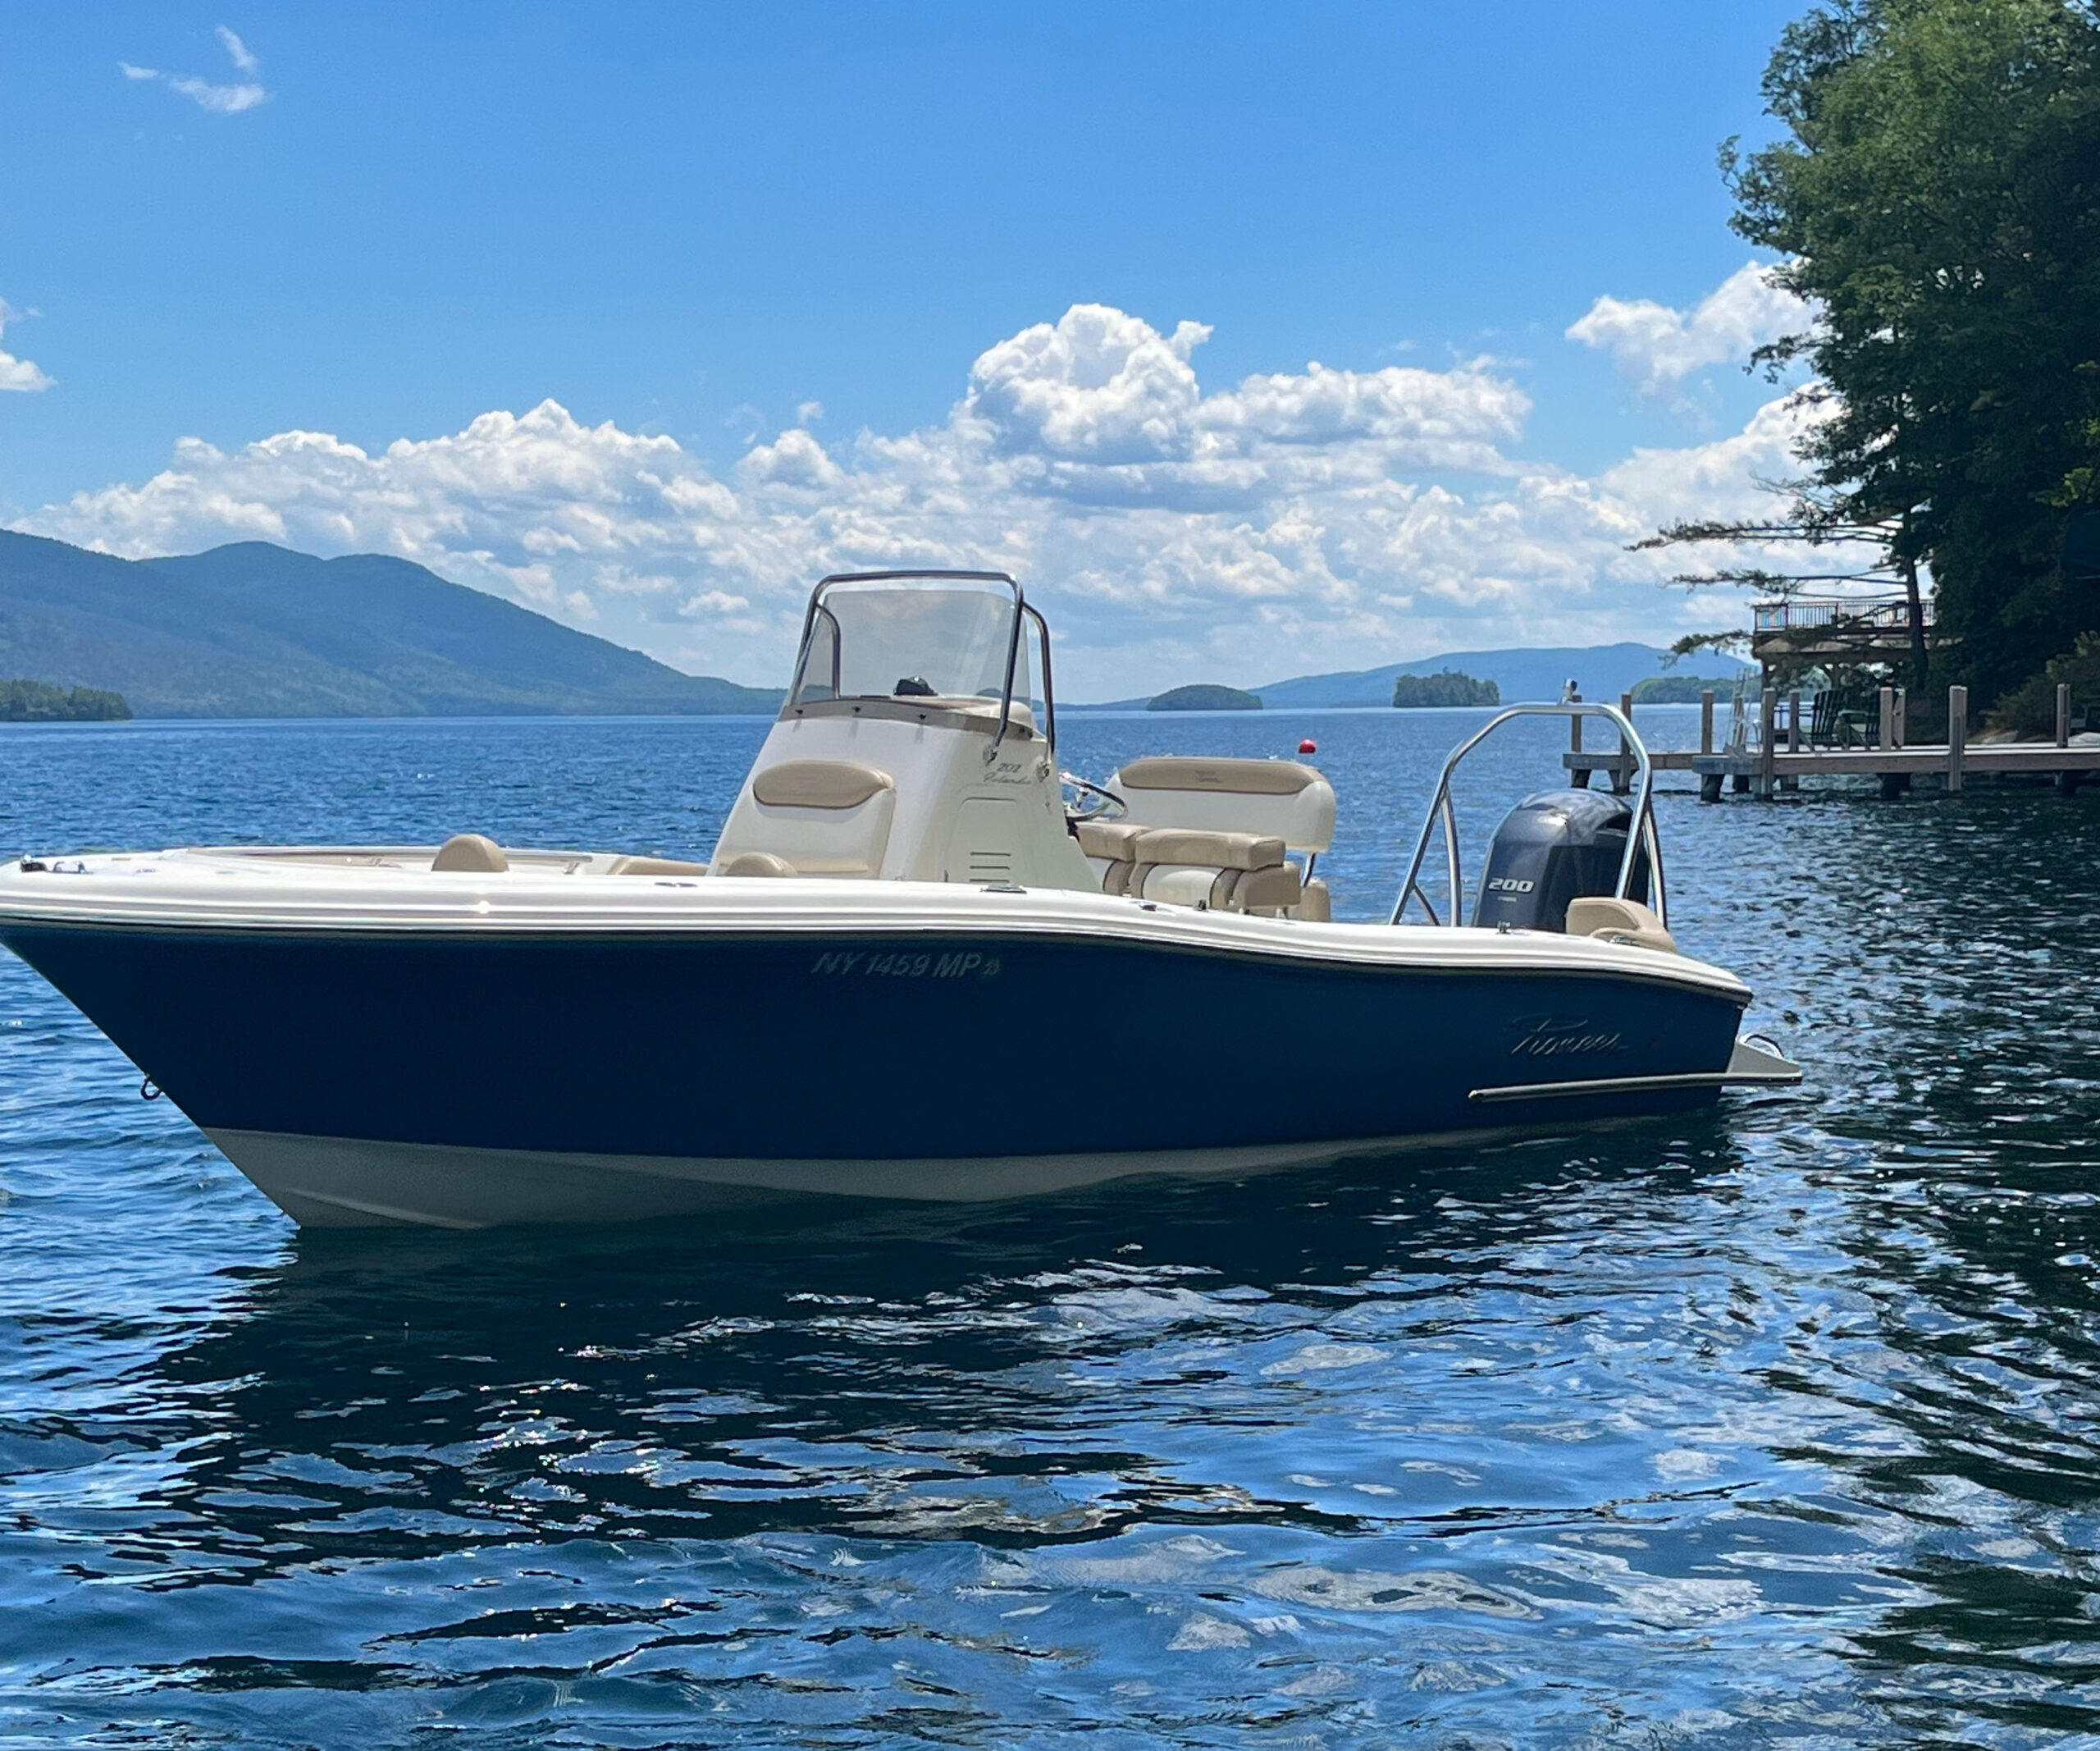 Why Boat Rental Is The Perfect Way To Explore Lake George?